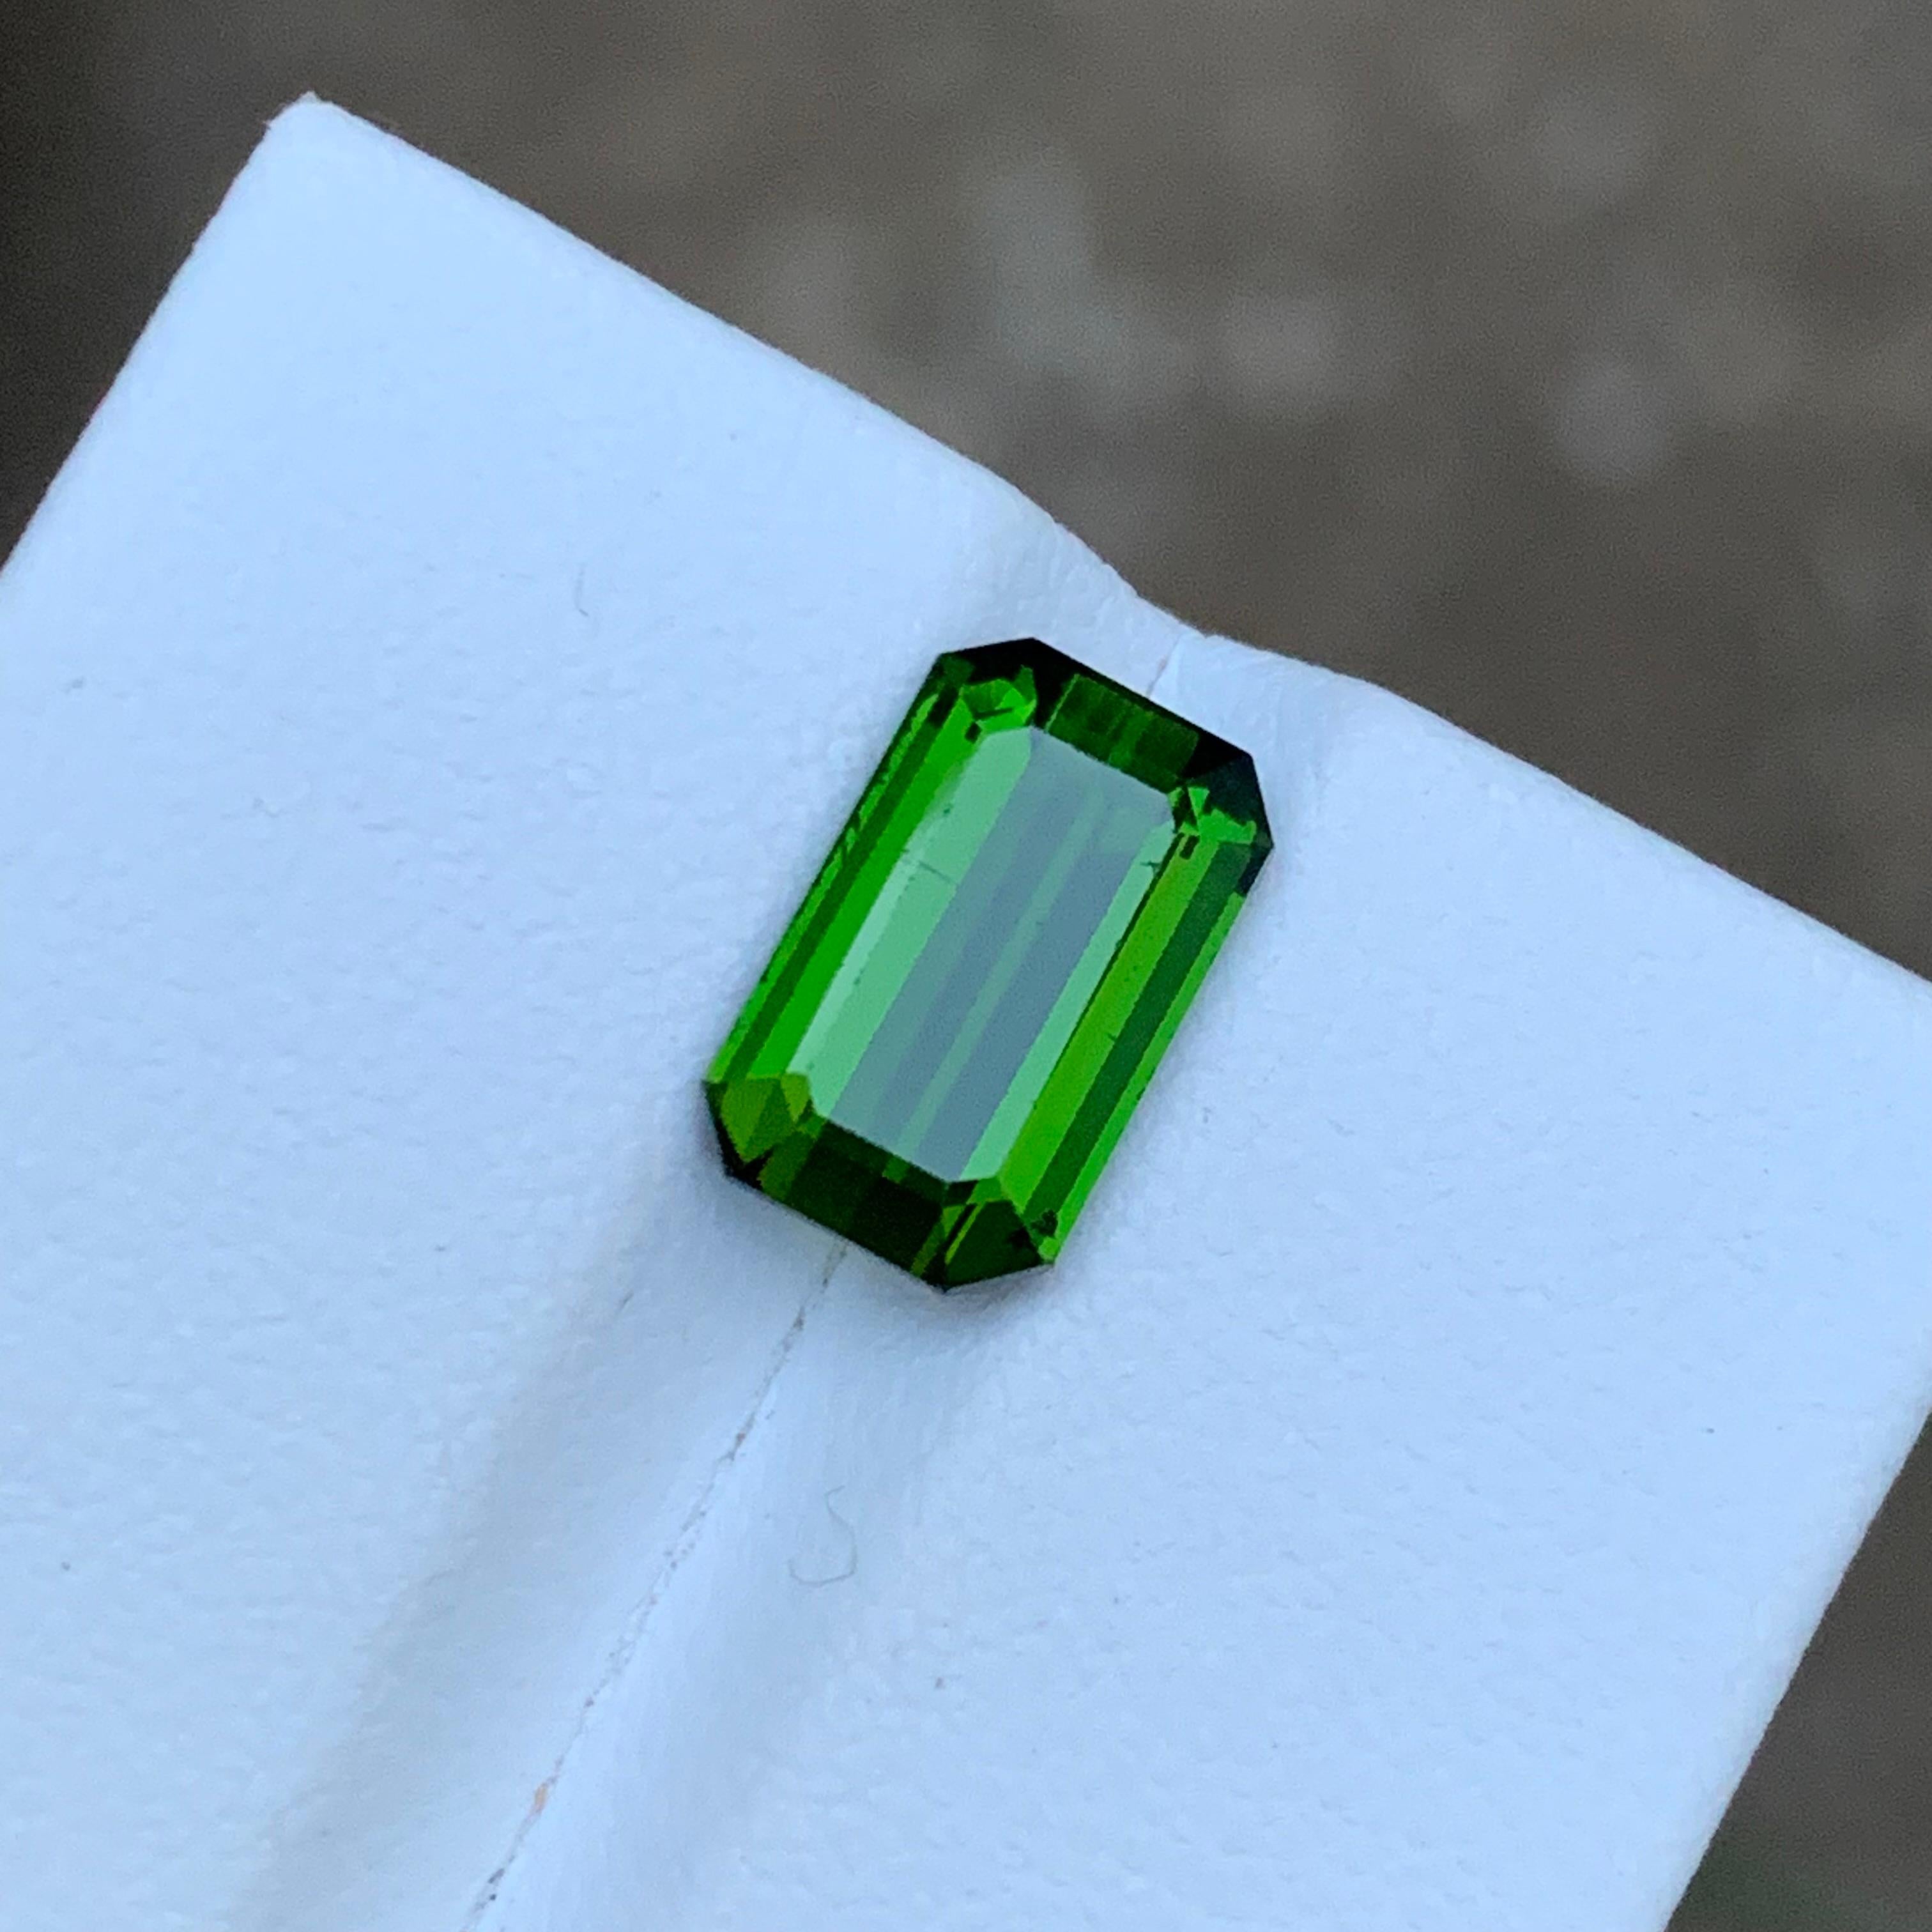 Rare Vivid Green Tourmaline Gemstone, 3.35 Ct Emerald Cut for Ring/Necklace For Sale 8